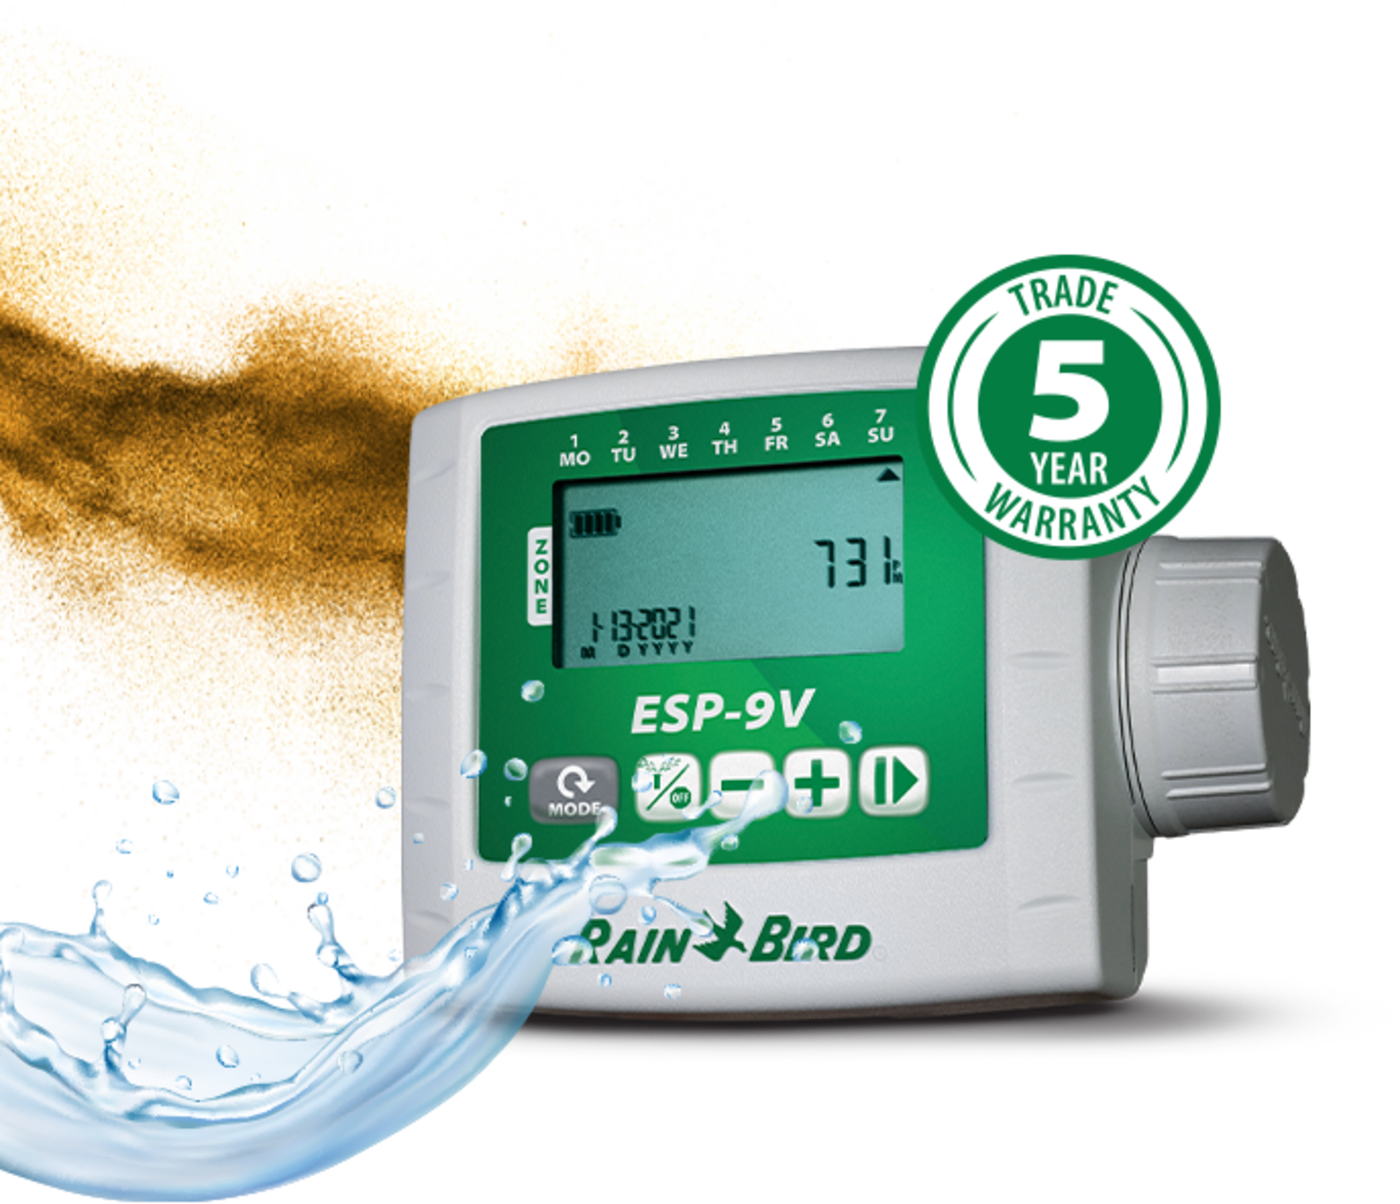 Rain Bird ESP-9V battery-operated irrigation controller with industry leading 5-year warranty